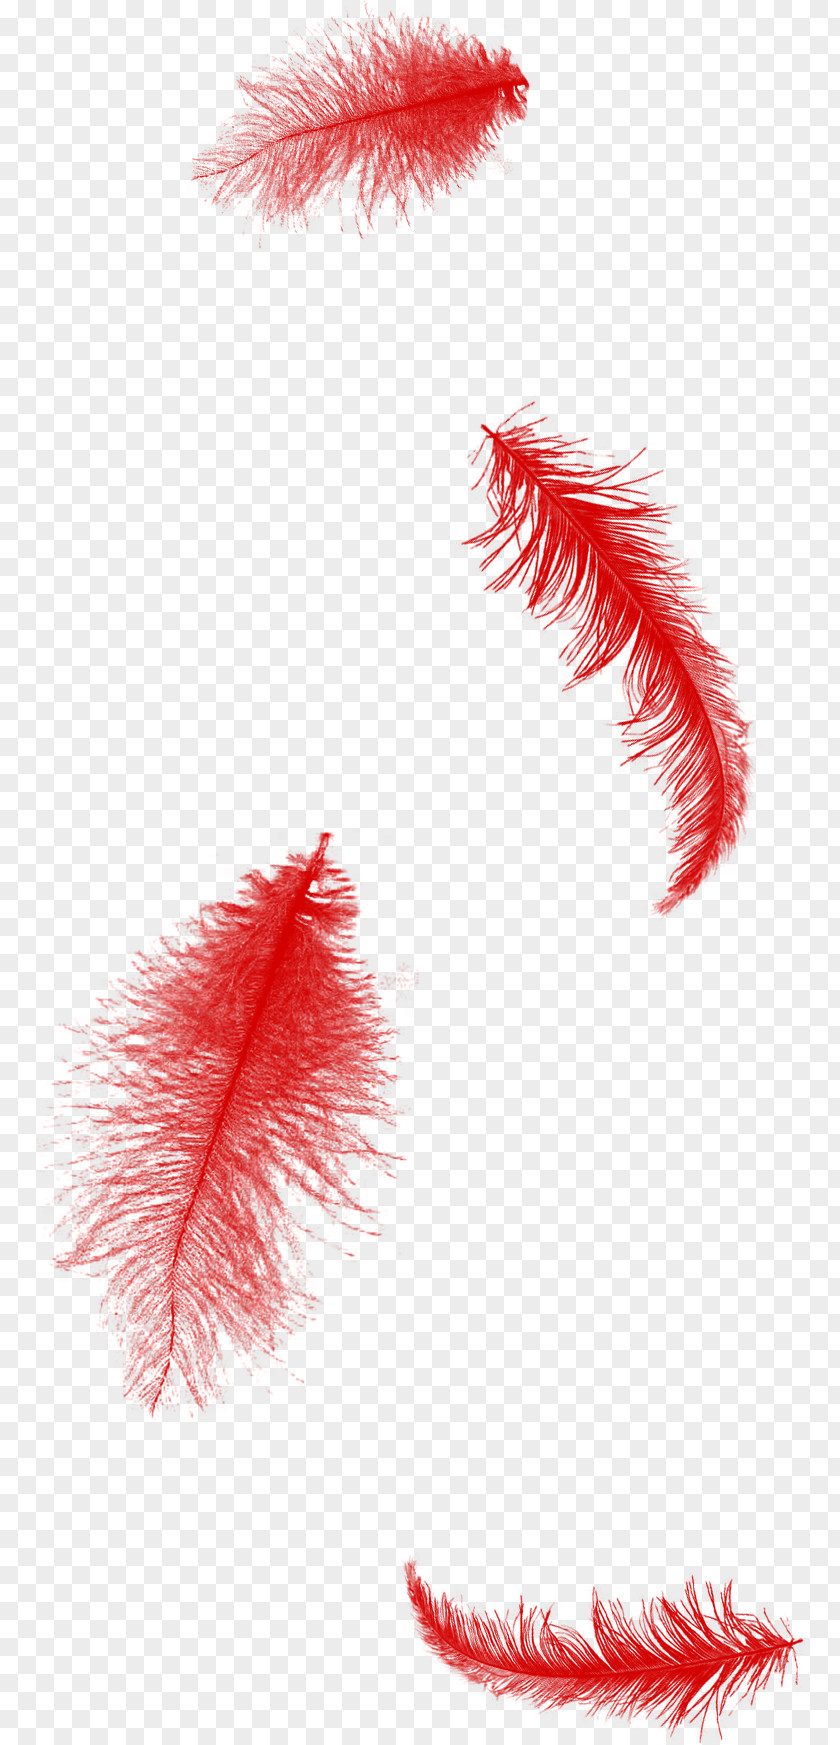 Red Feather Clip Art PNG